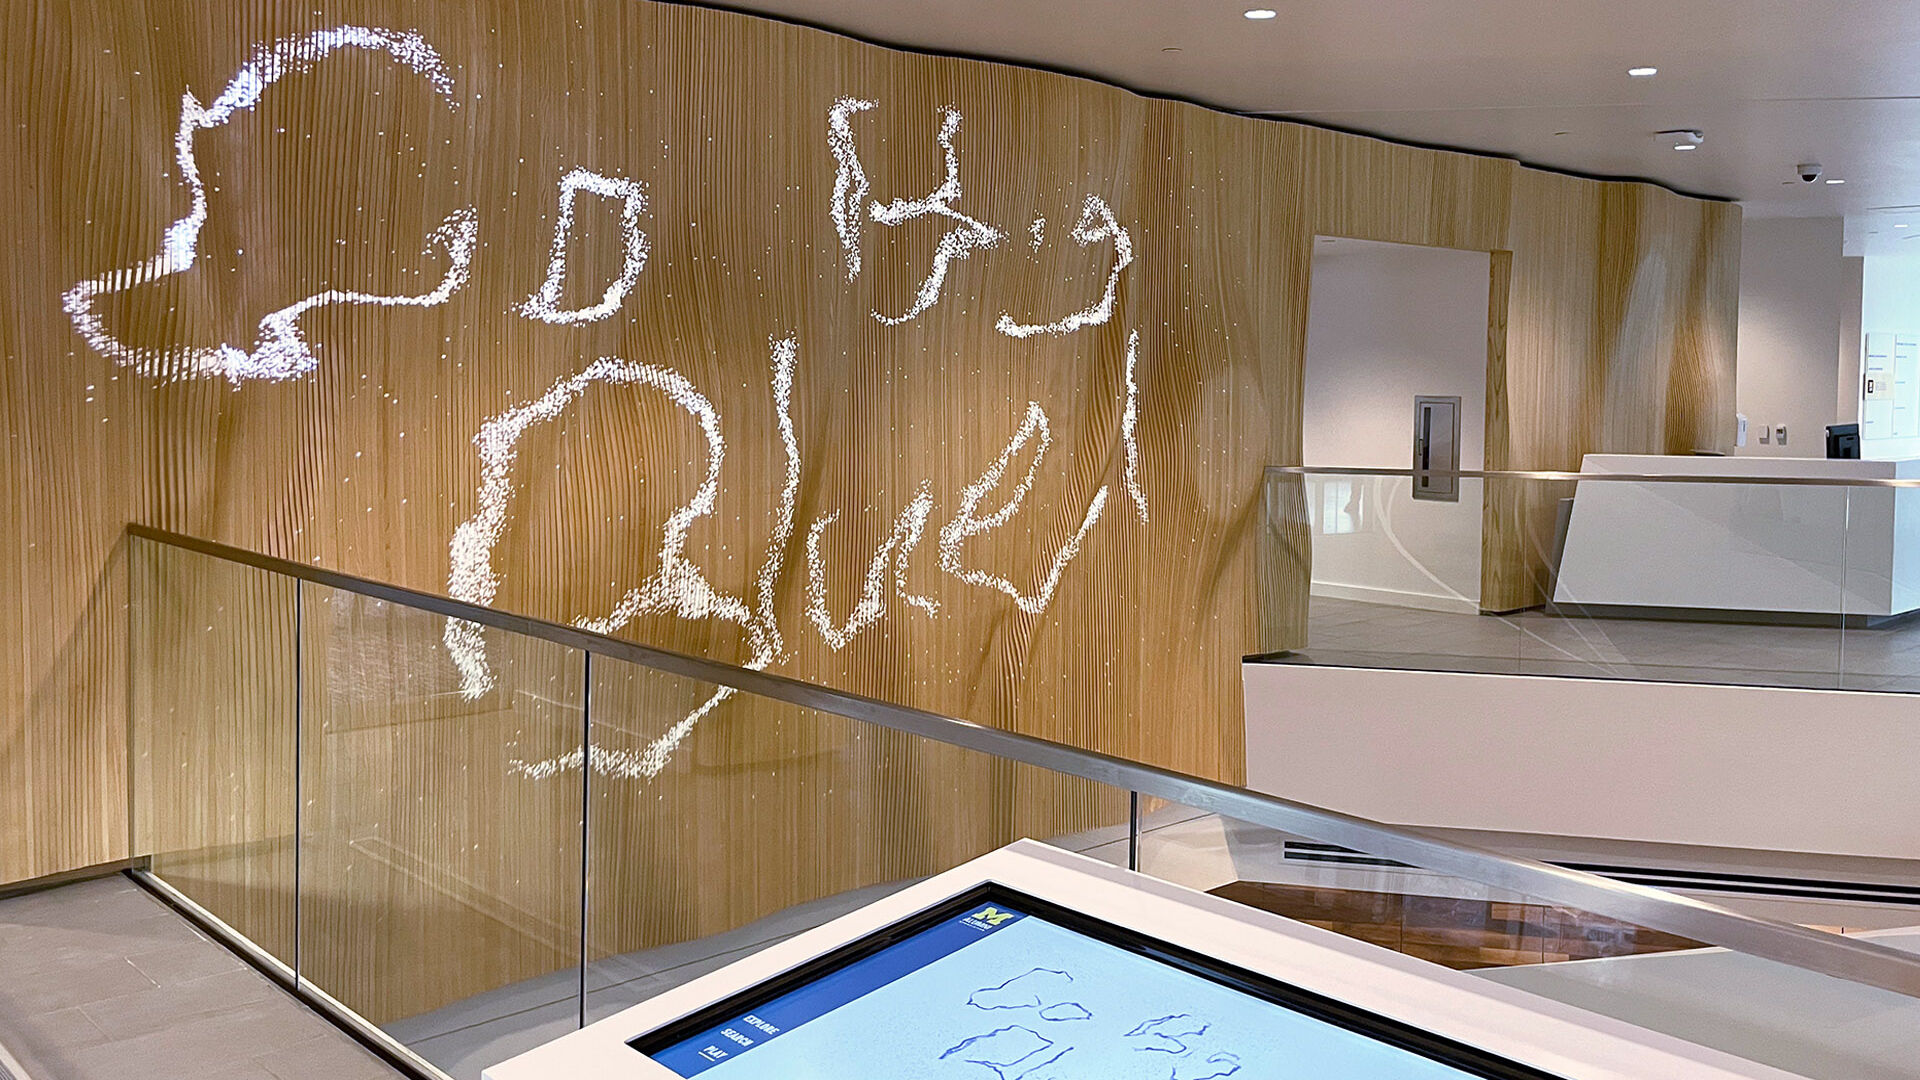 Drawing on touch table is displayed on feature wall